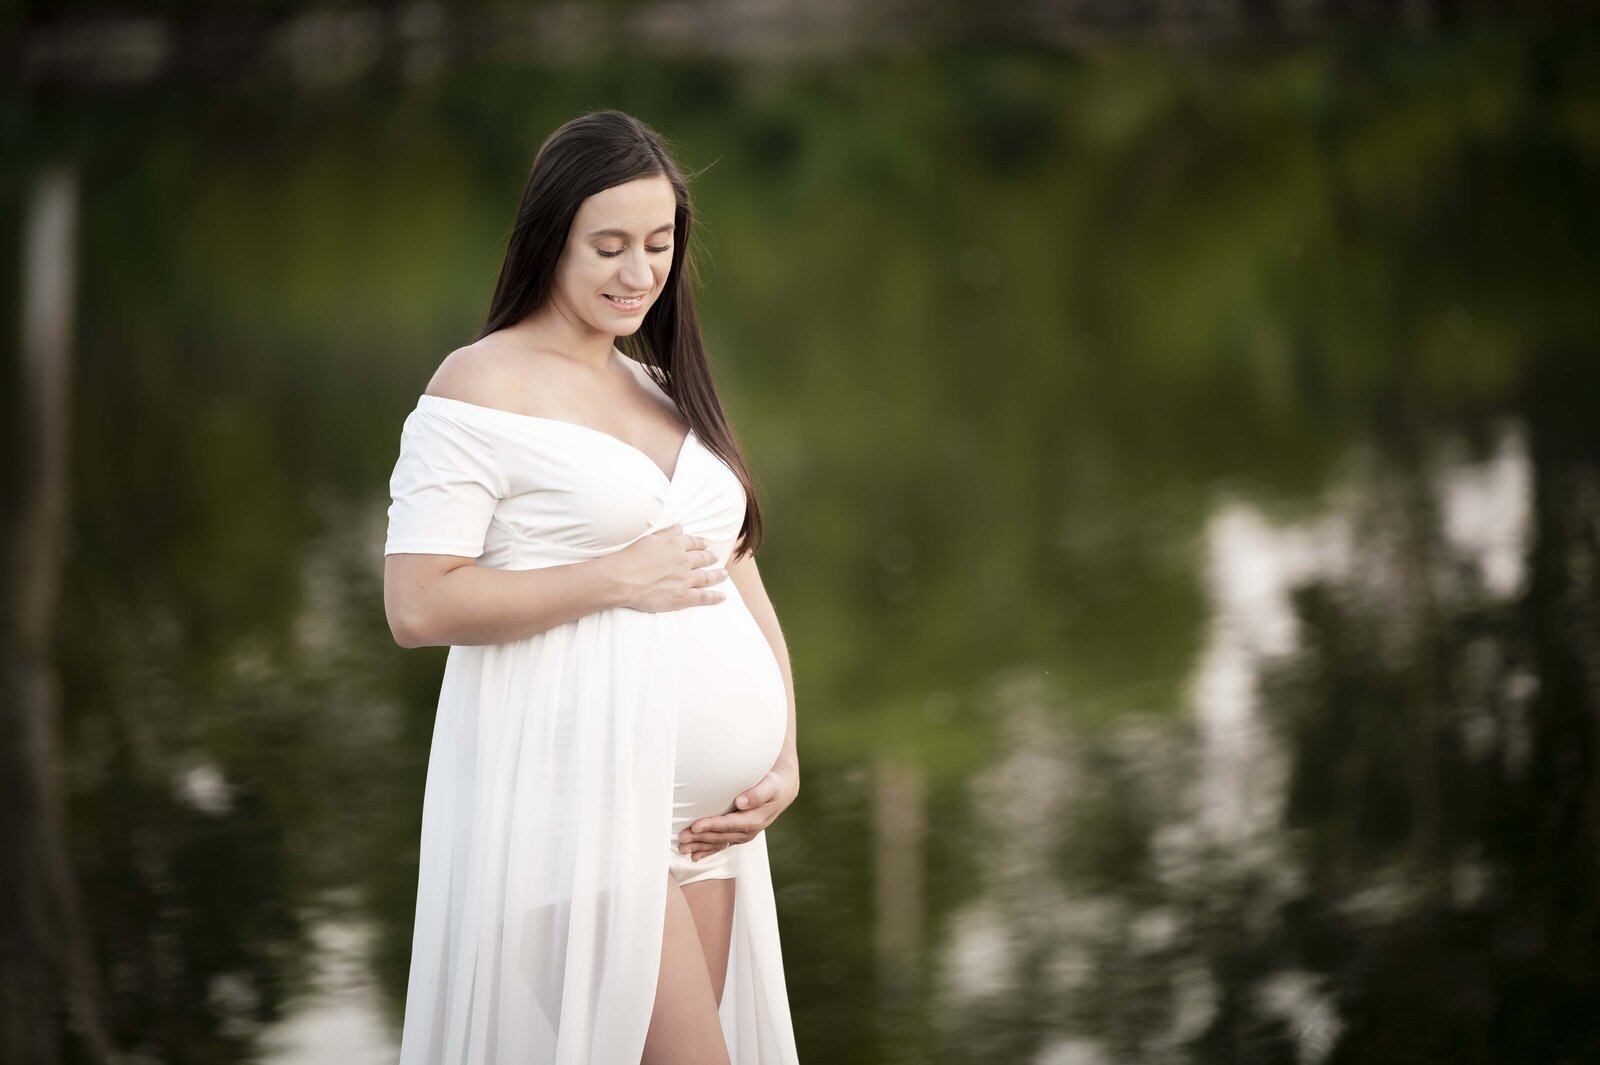 Pregnant woman holding belly with water behind her in Elkhart Indiana area